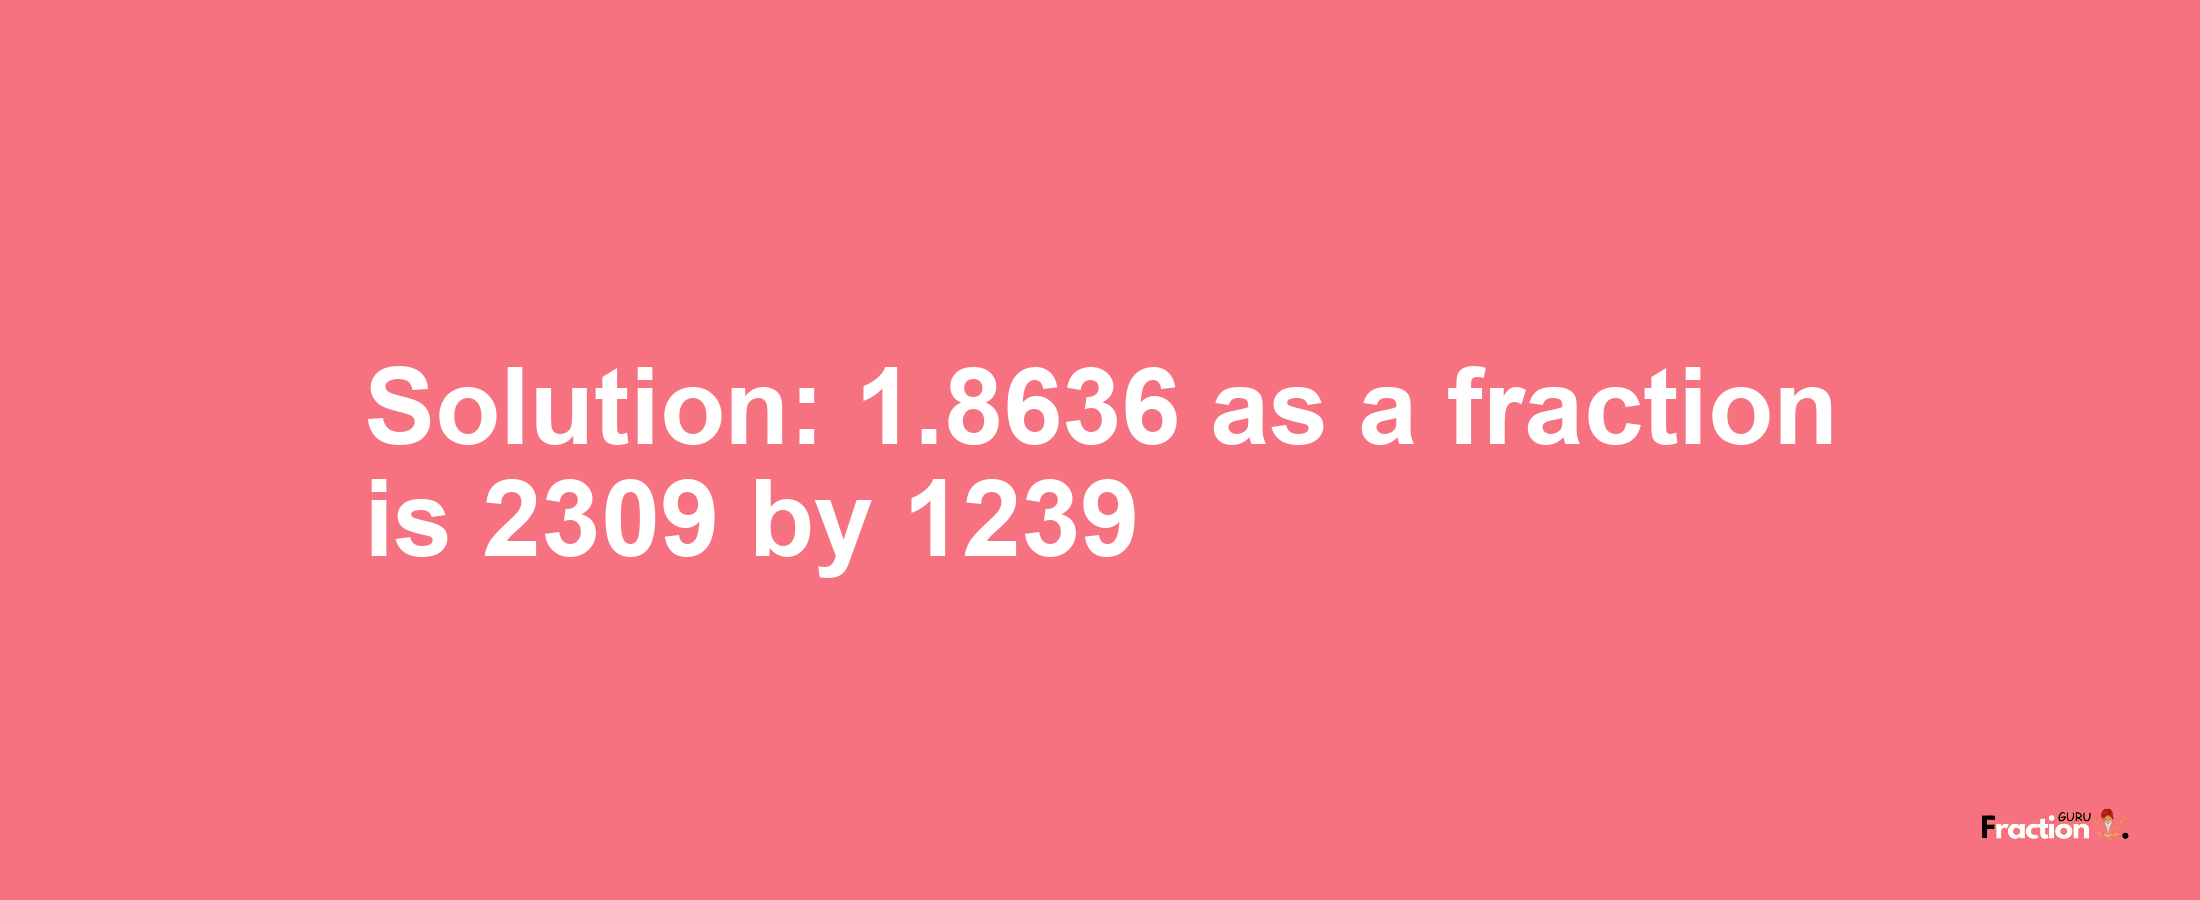 Solution:1.8636 as a fraction is 2309/1239